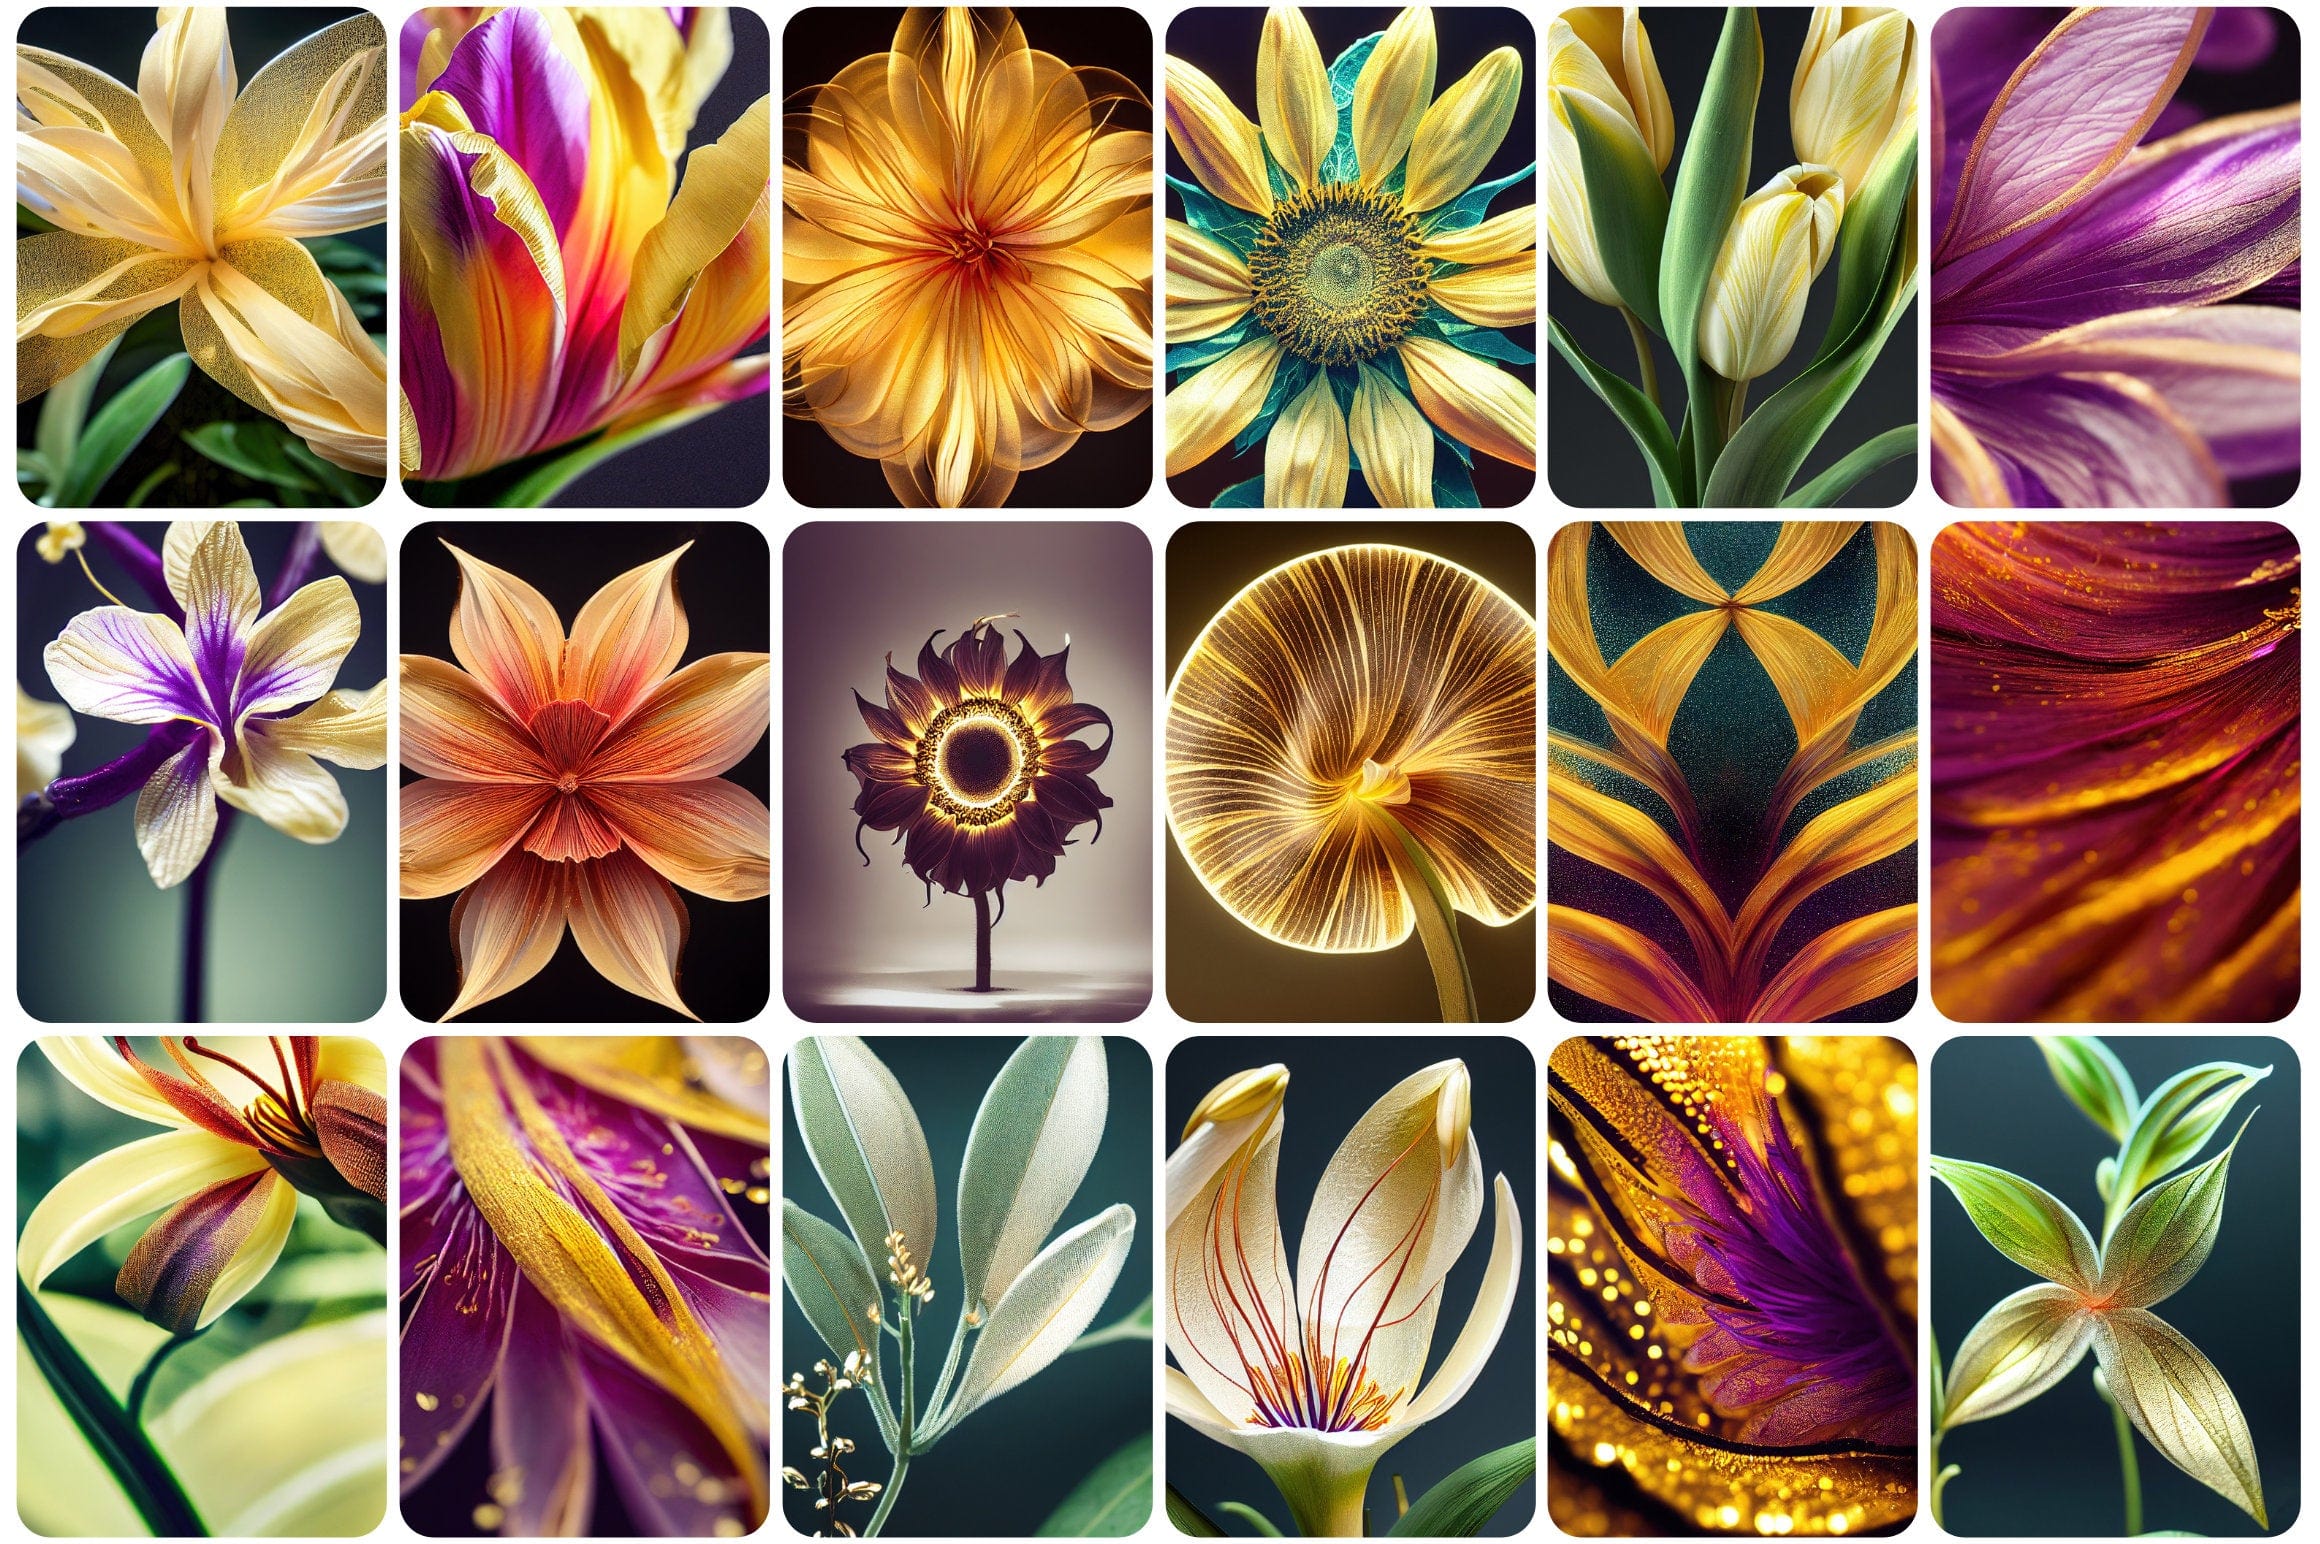 157 High-Quality Macro Flower Images Bundle - Perfect for Photography, Graphic Design, and Home Decor - Collection of Close-up Floral Images Digital Download Sumobundle